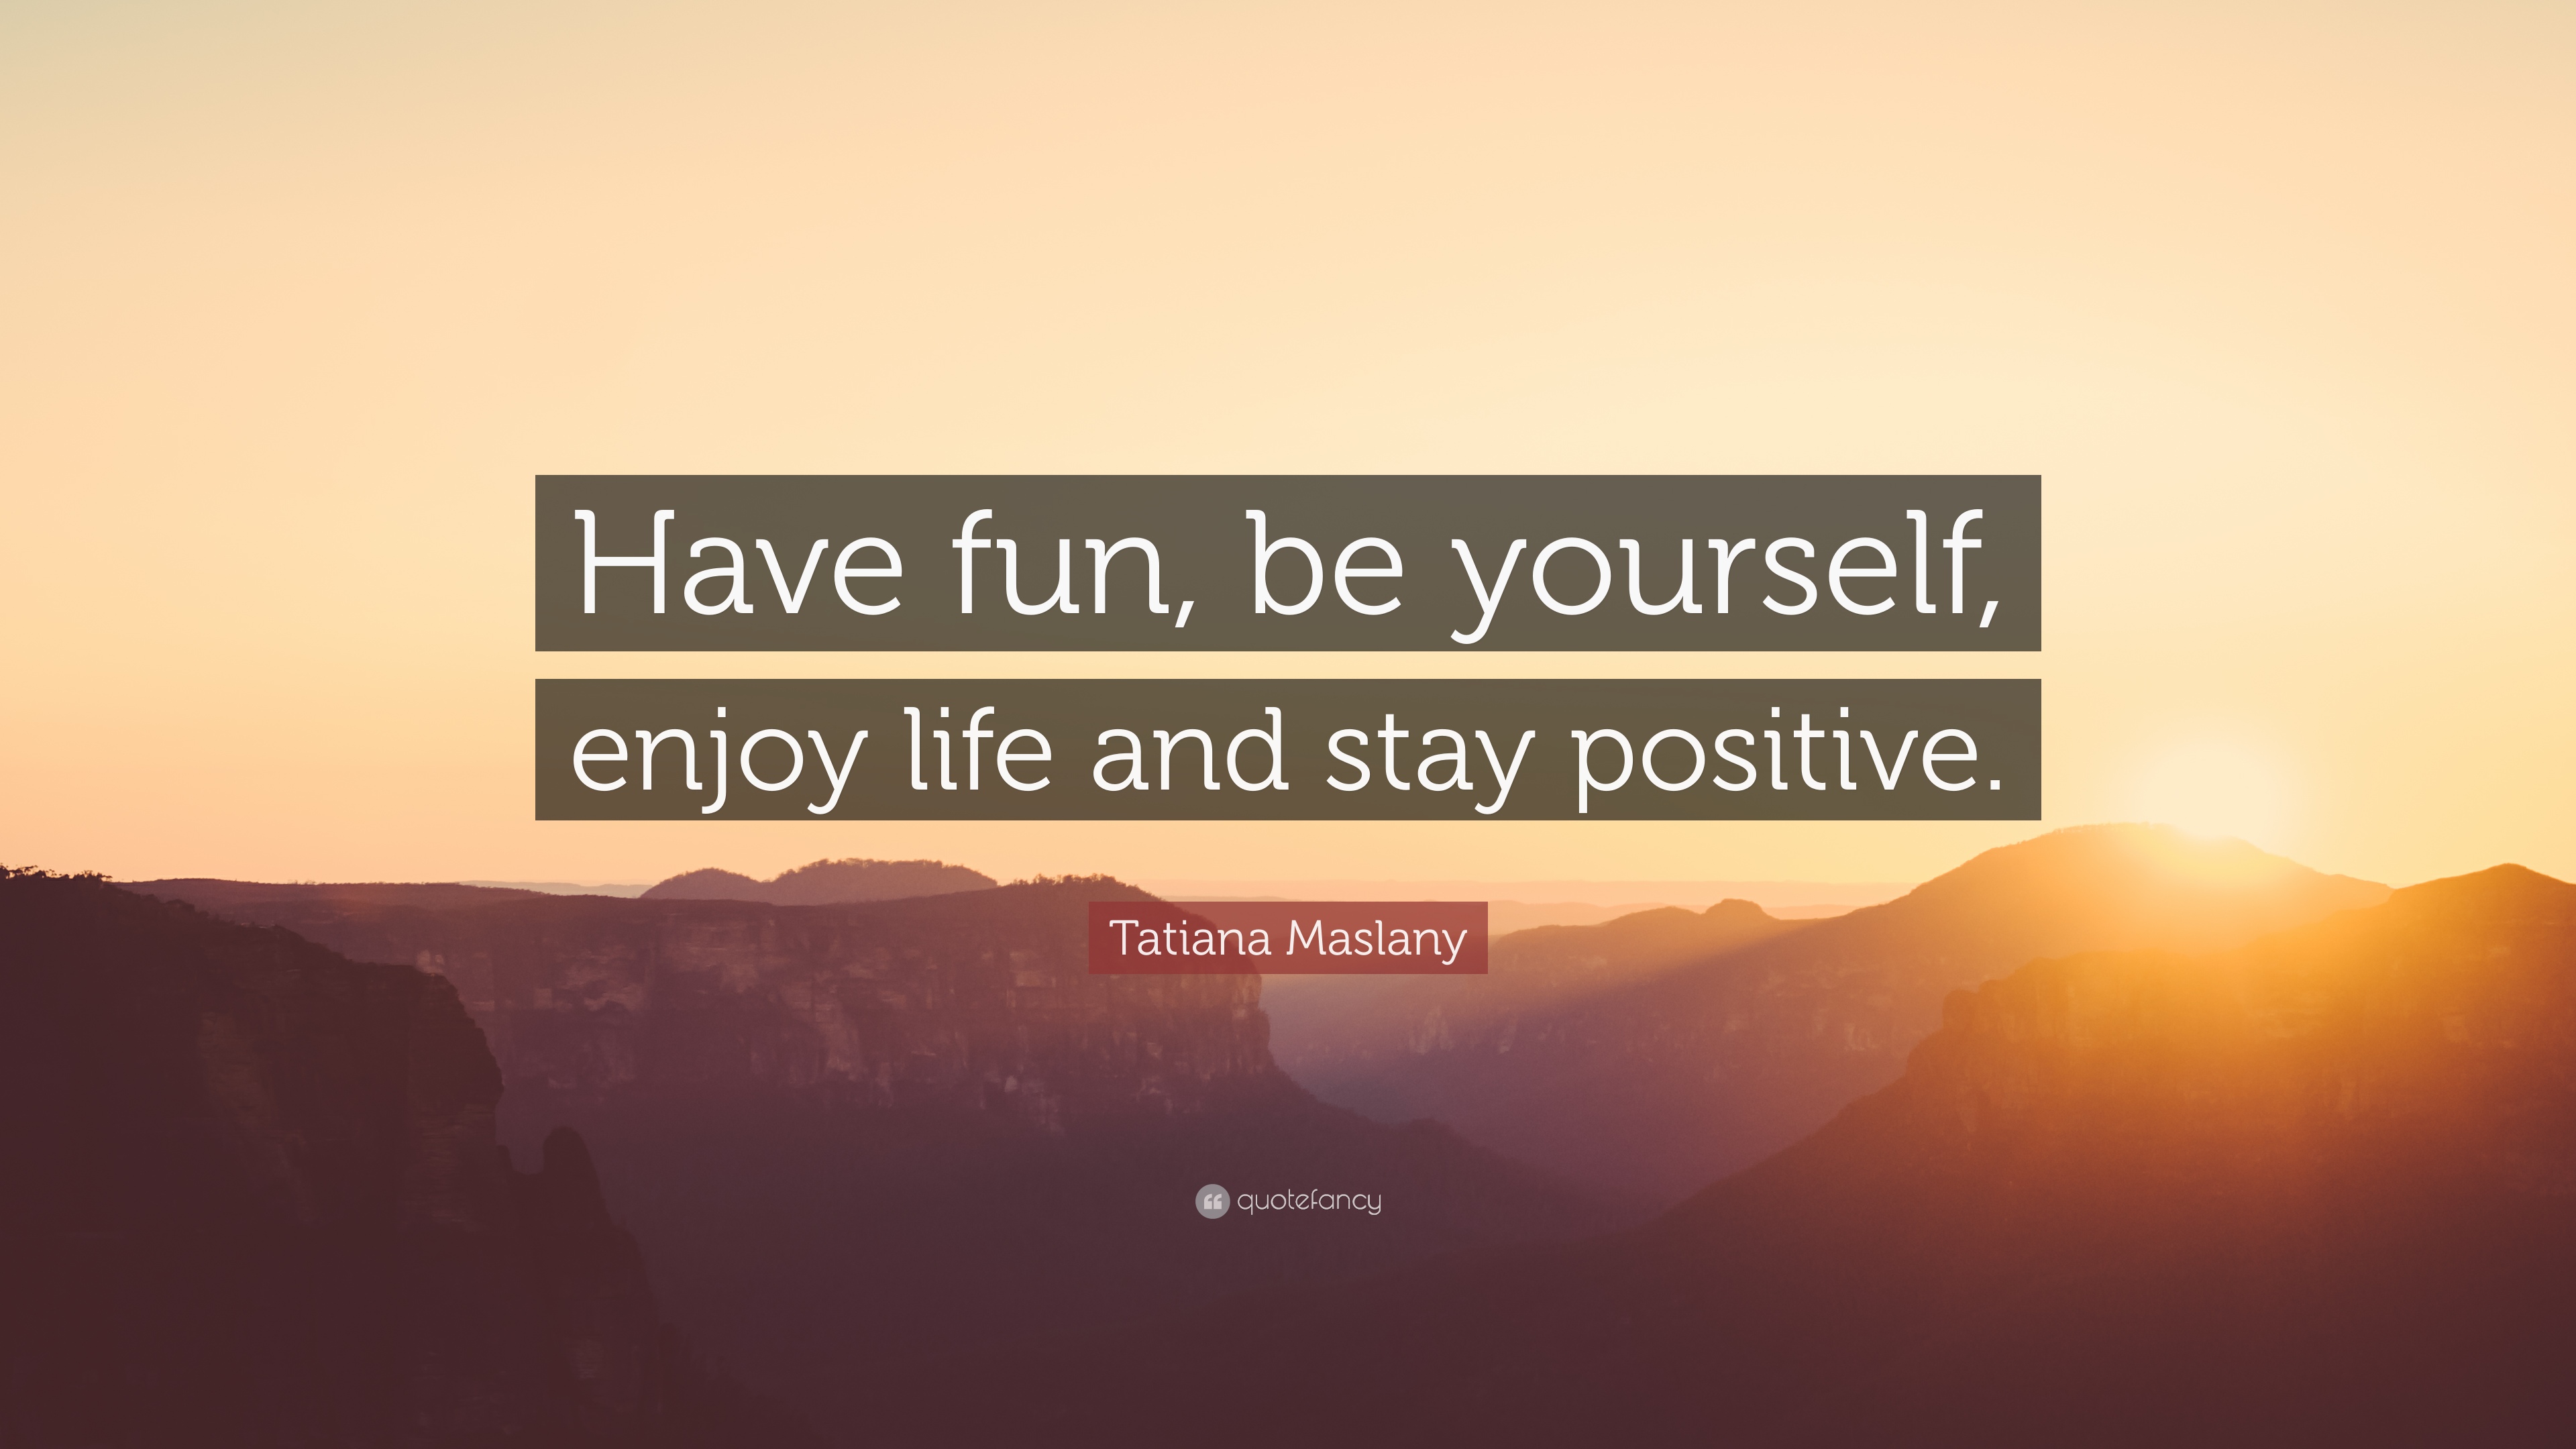 Tatiana Maslany Quote: “Have fun, be yourself, enjoy life and stay ...